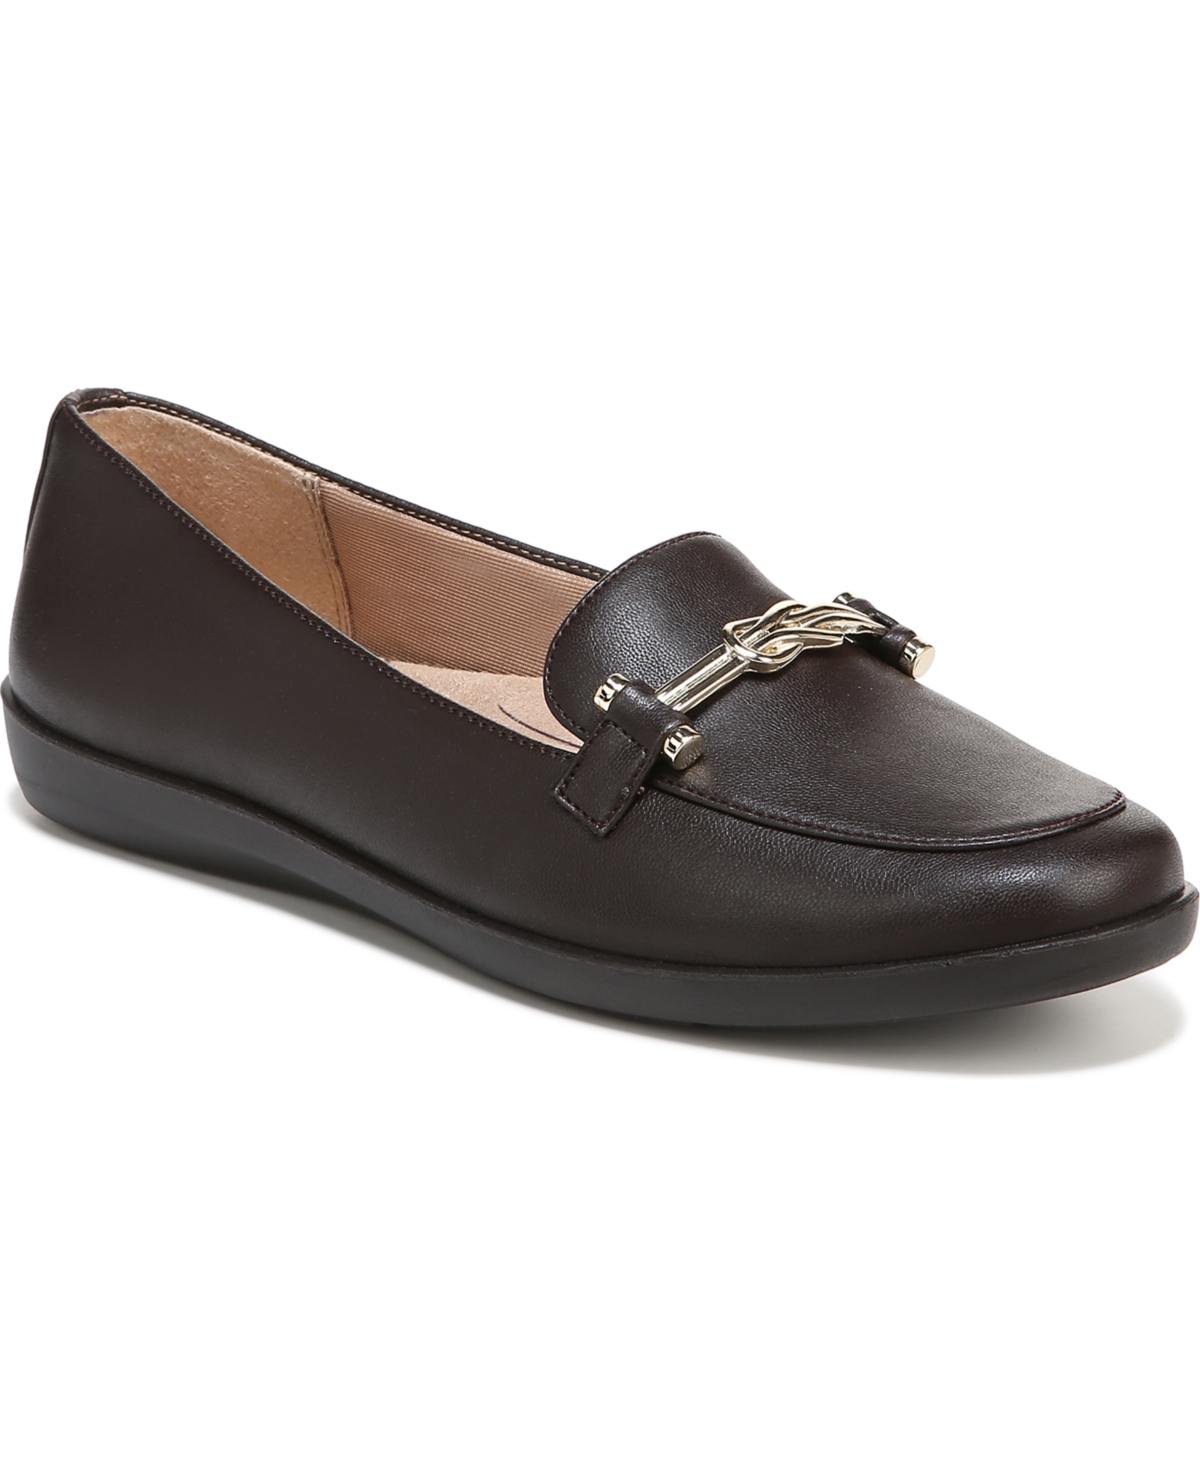 Shop Lifestride Nominate Slip On Loafers In Chocolate Brown Faux Leather